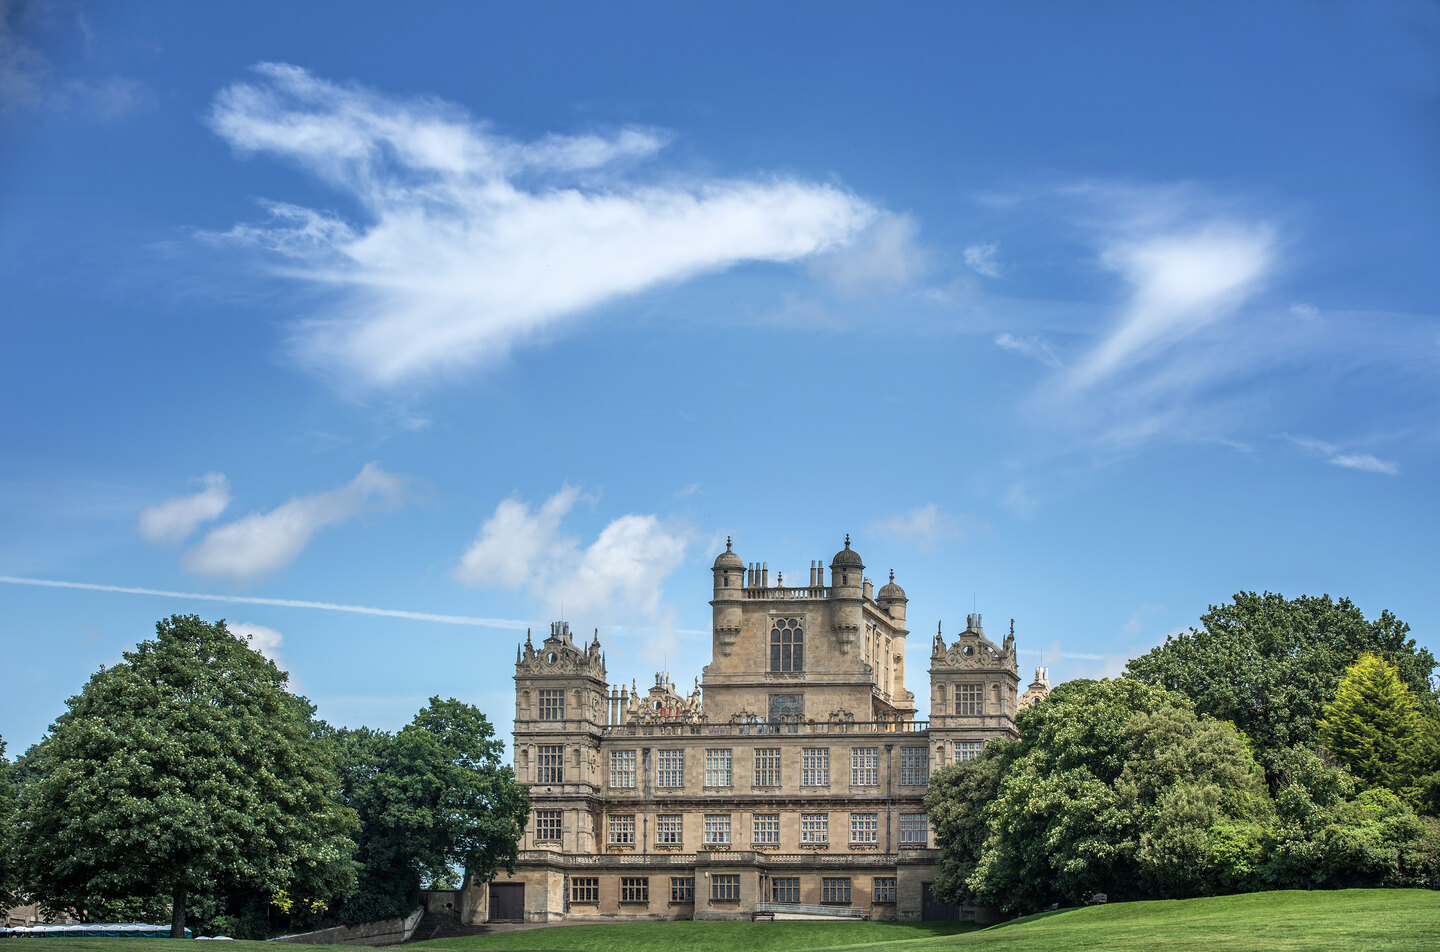 Student Accommodation in Wollaton, Nottingham - a view of Wollaton Hall from downhill in Wollaton Park on a sunny day